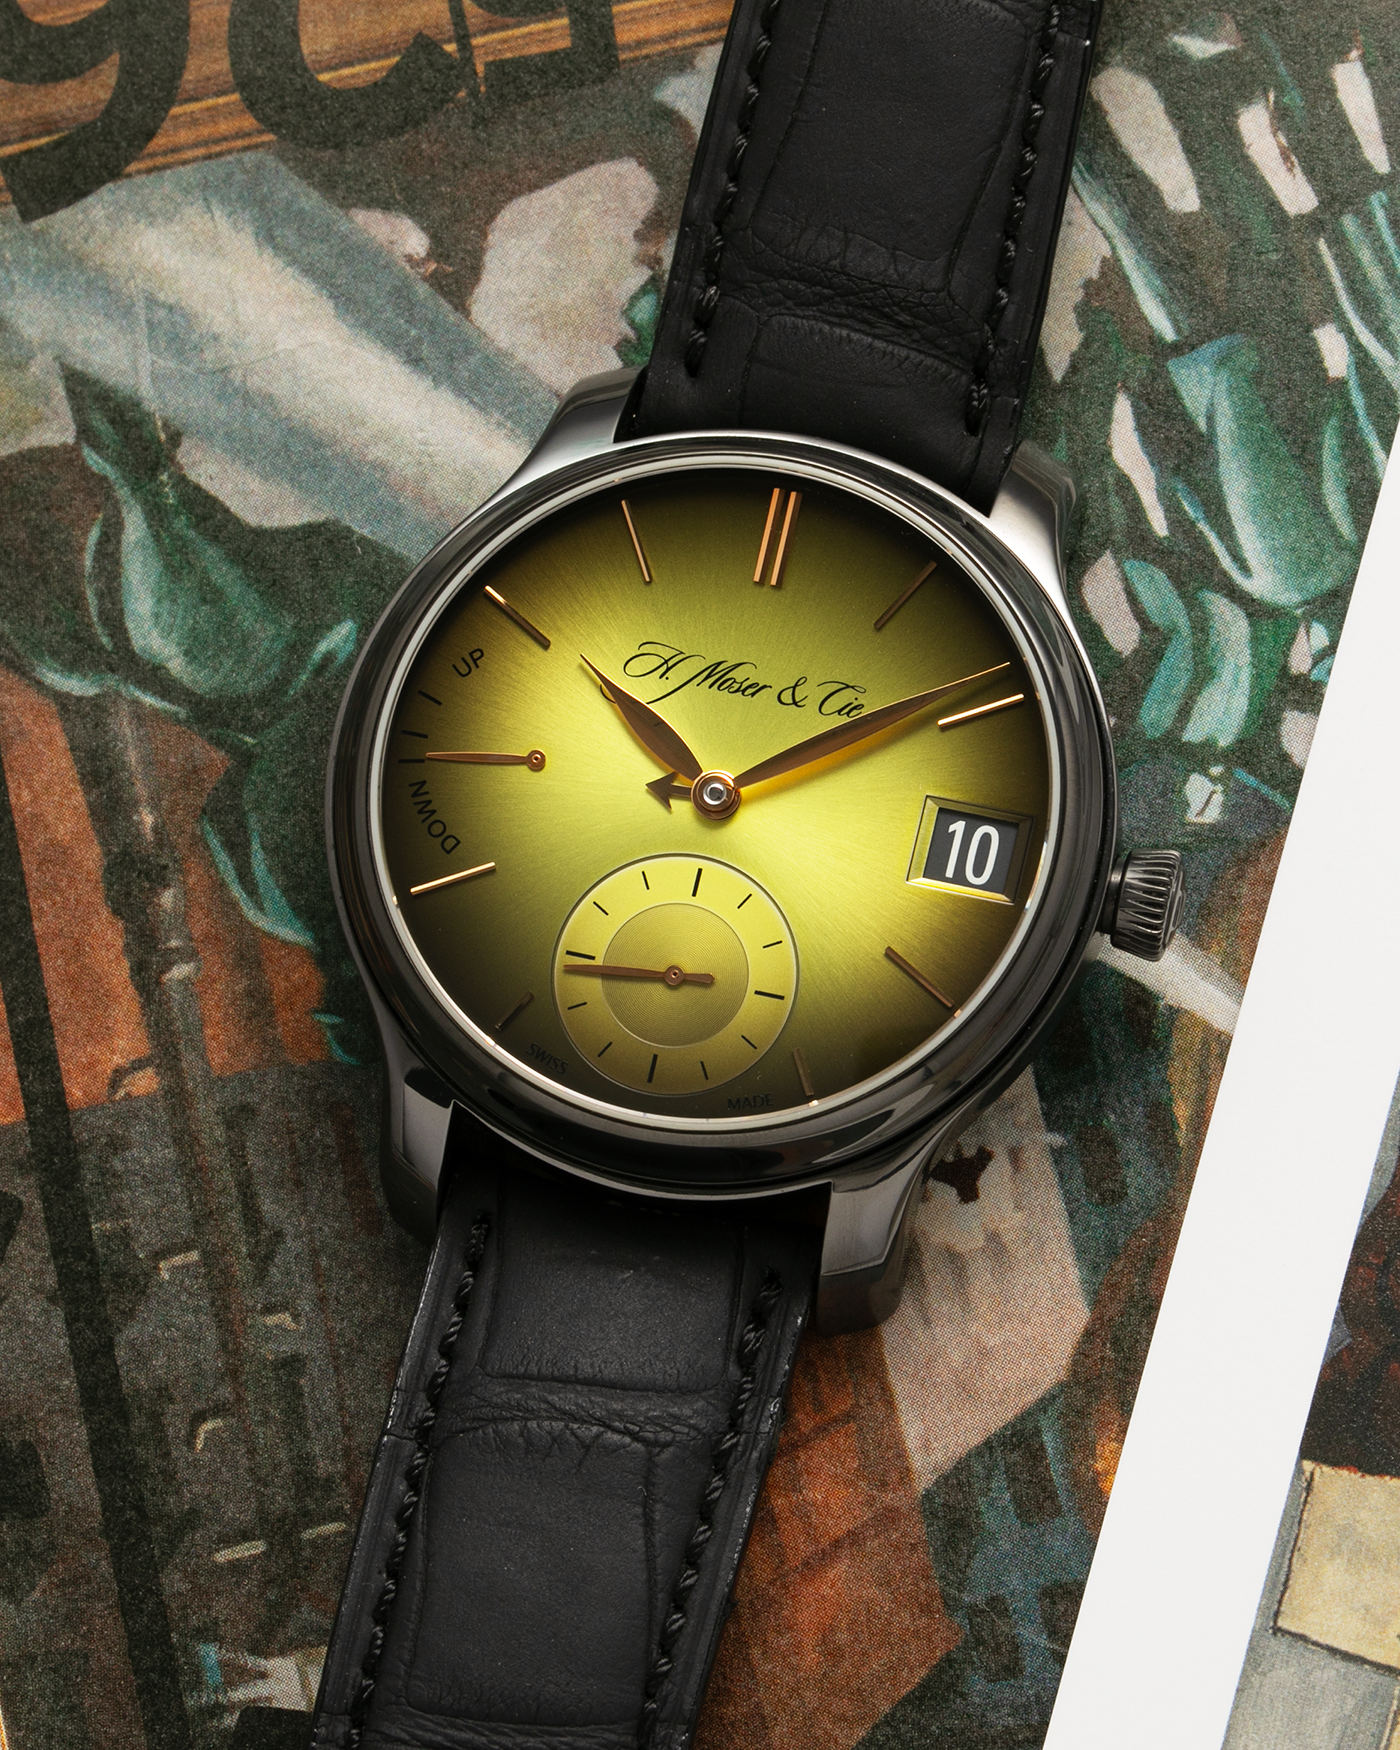 Brand: H.Moser & Cie Year: 2020 Model: Endeavour Perpetual Calendar Yellow-Green Fumé Reference Number: 1344-0504 Material: DLC Coated Titanium Movement: H. Moser Cal. HMC 341, Manual-Winding Case Diameter: 40.8mm Lug Width: 20mm Strap: H. Moser & Cie Black Alligator Leather Strap with Signed DLC Coated Titanium Tang Buckle